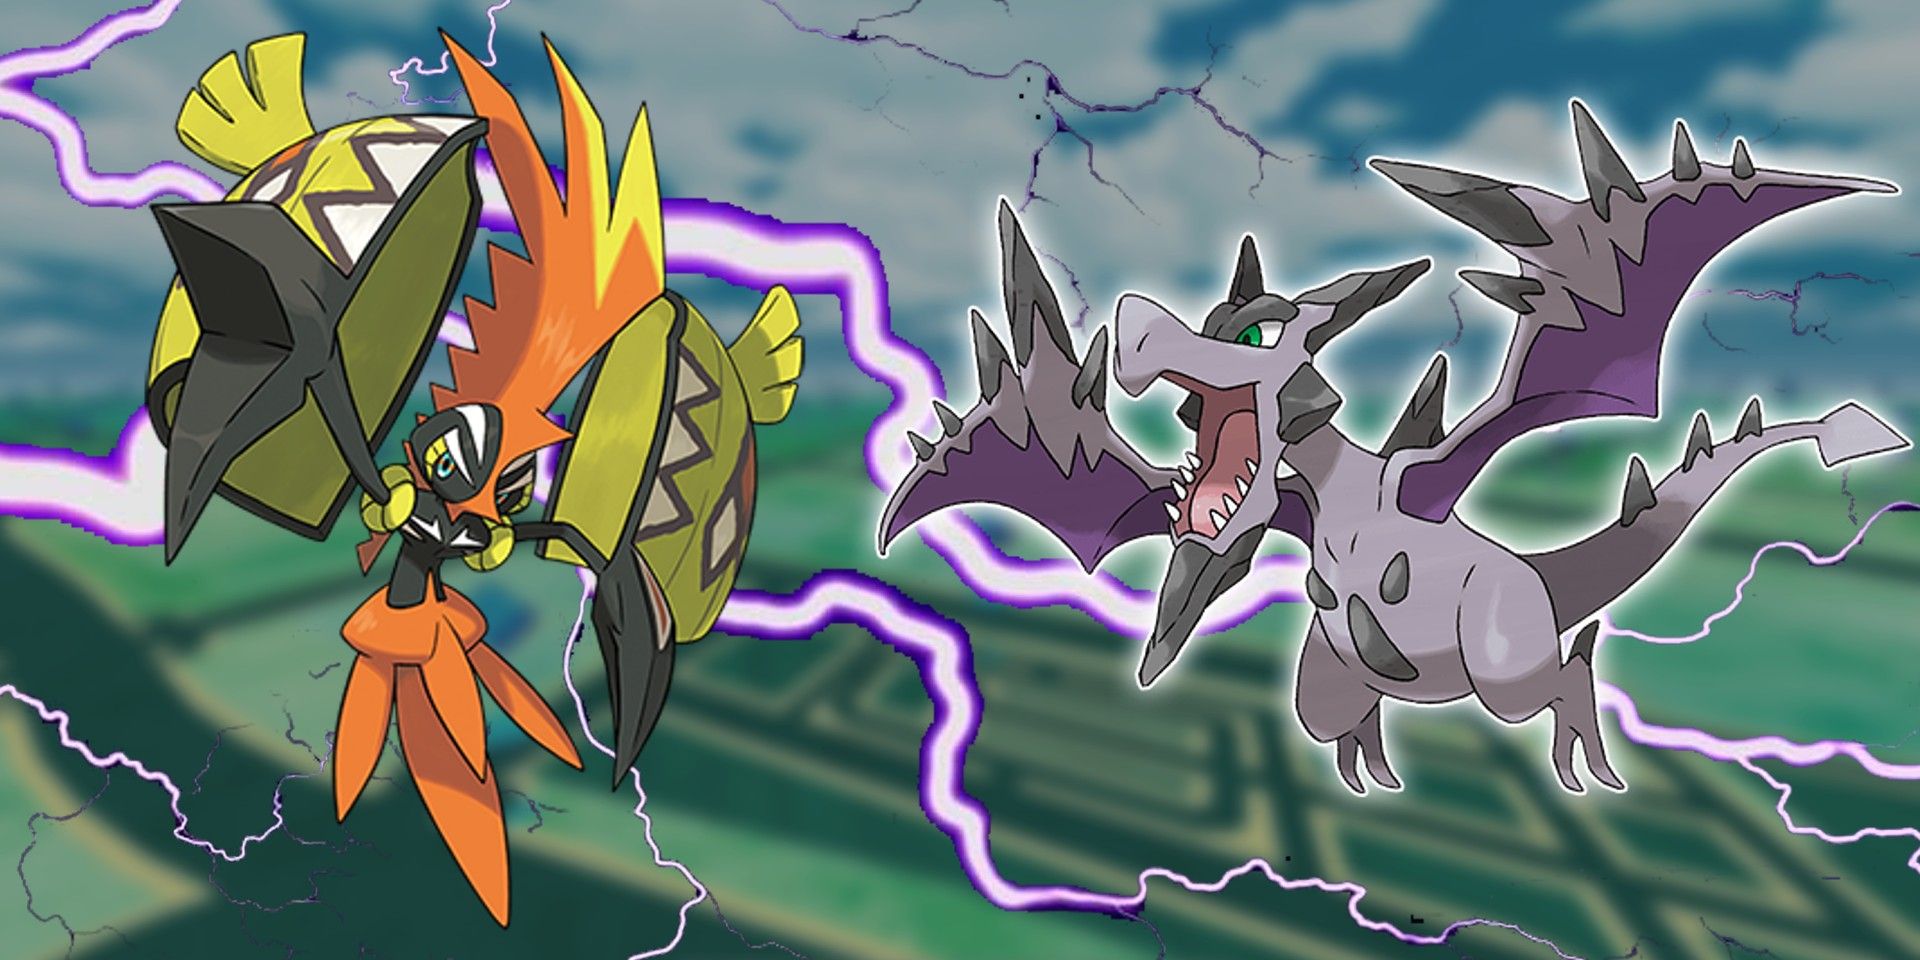 Pokemon's Tapu Koko to the left and Mega Aerodactyl to the right. Pokemon's Regice is on the left and Mega Lopunny is on the right. Behind them is a purple lightning effect with Pokémon GO's layout in the background.